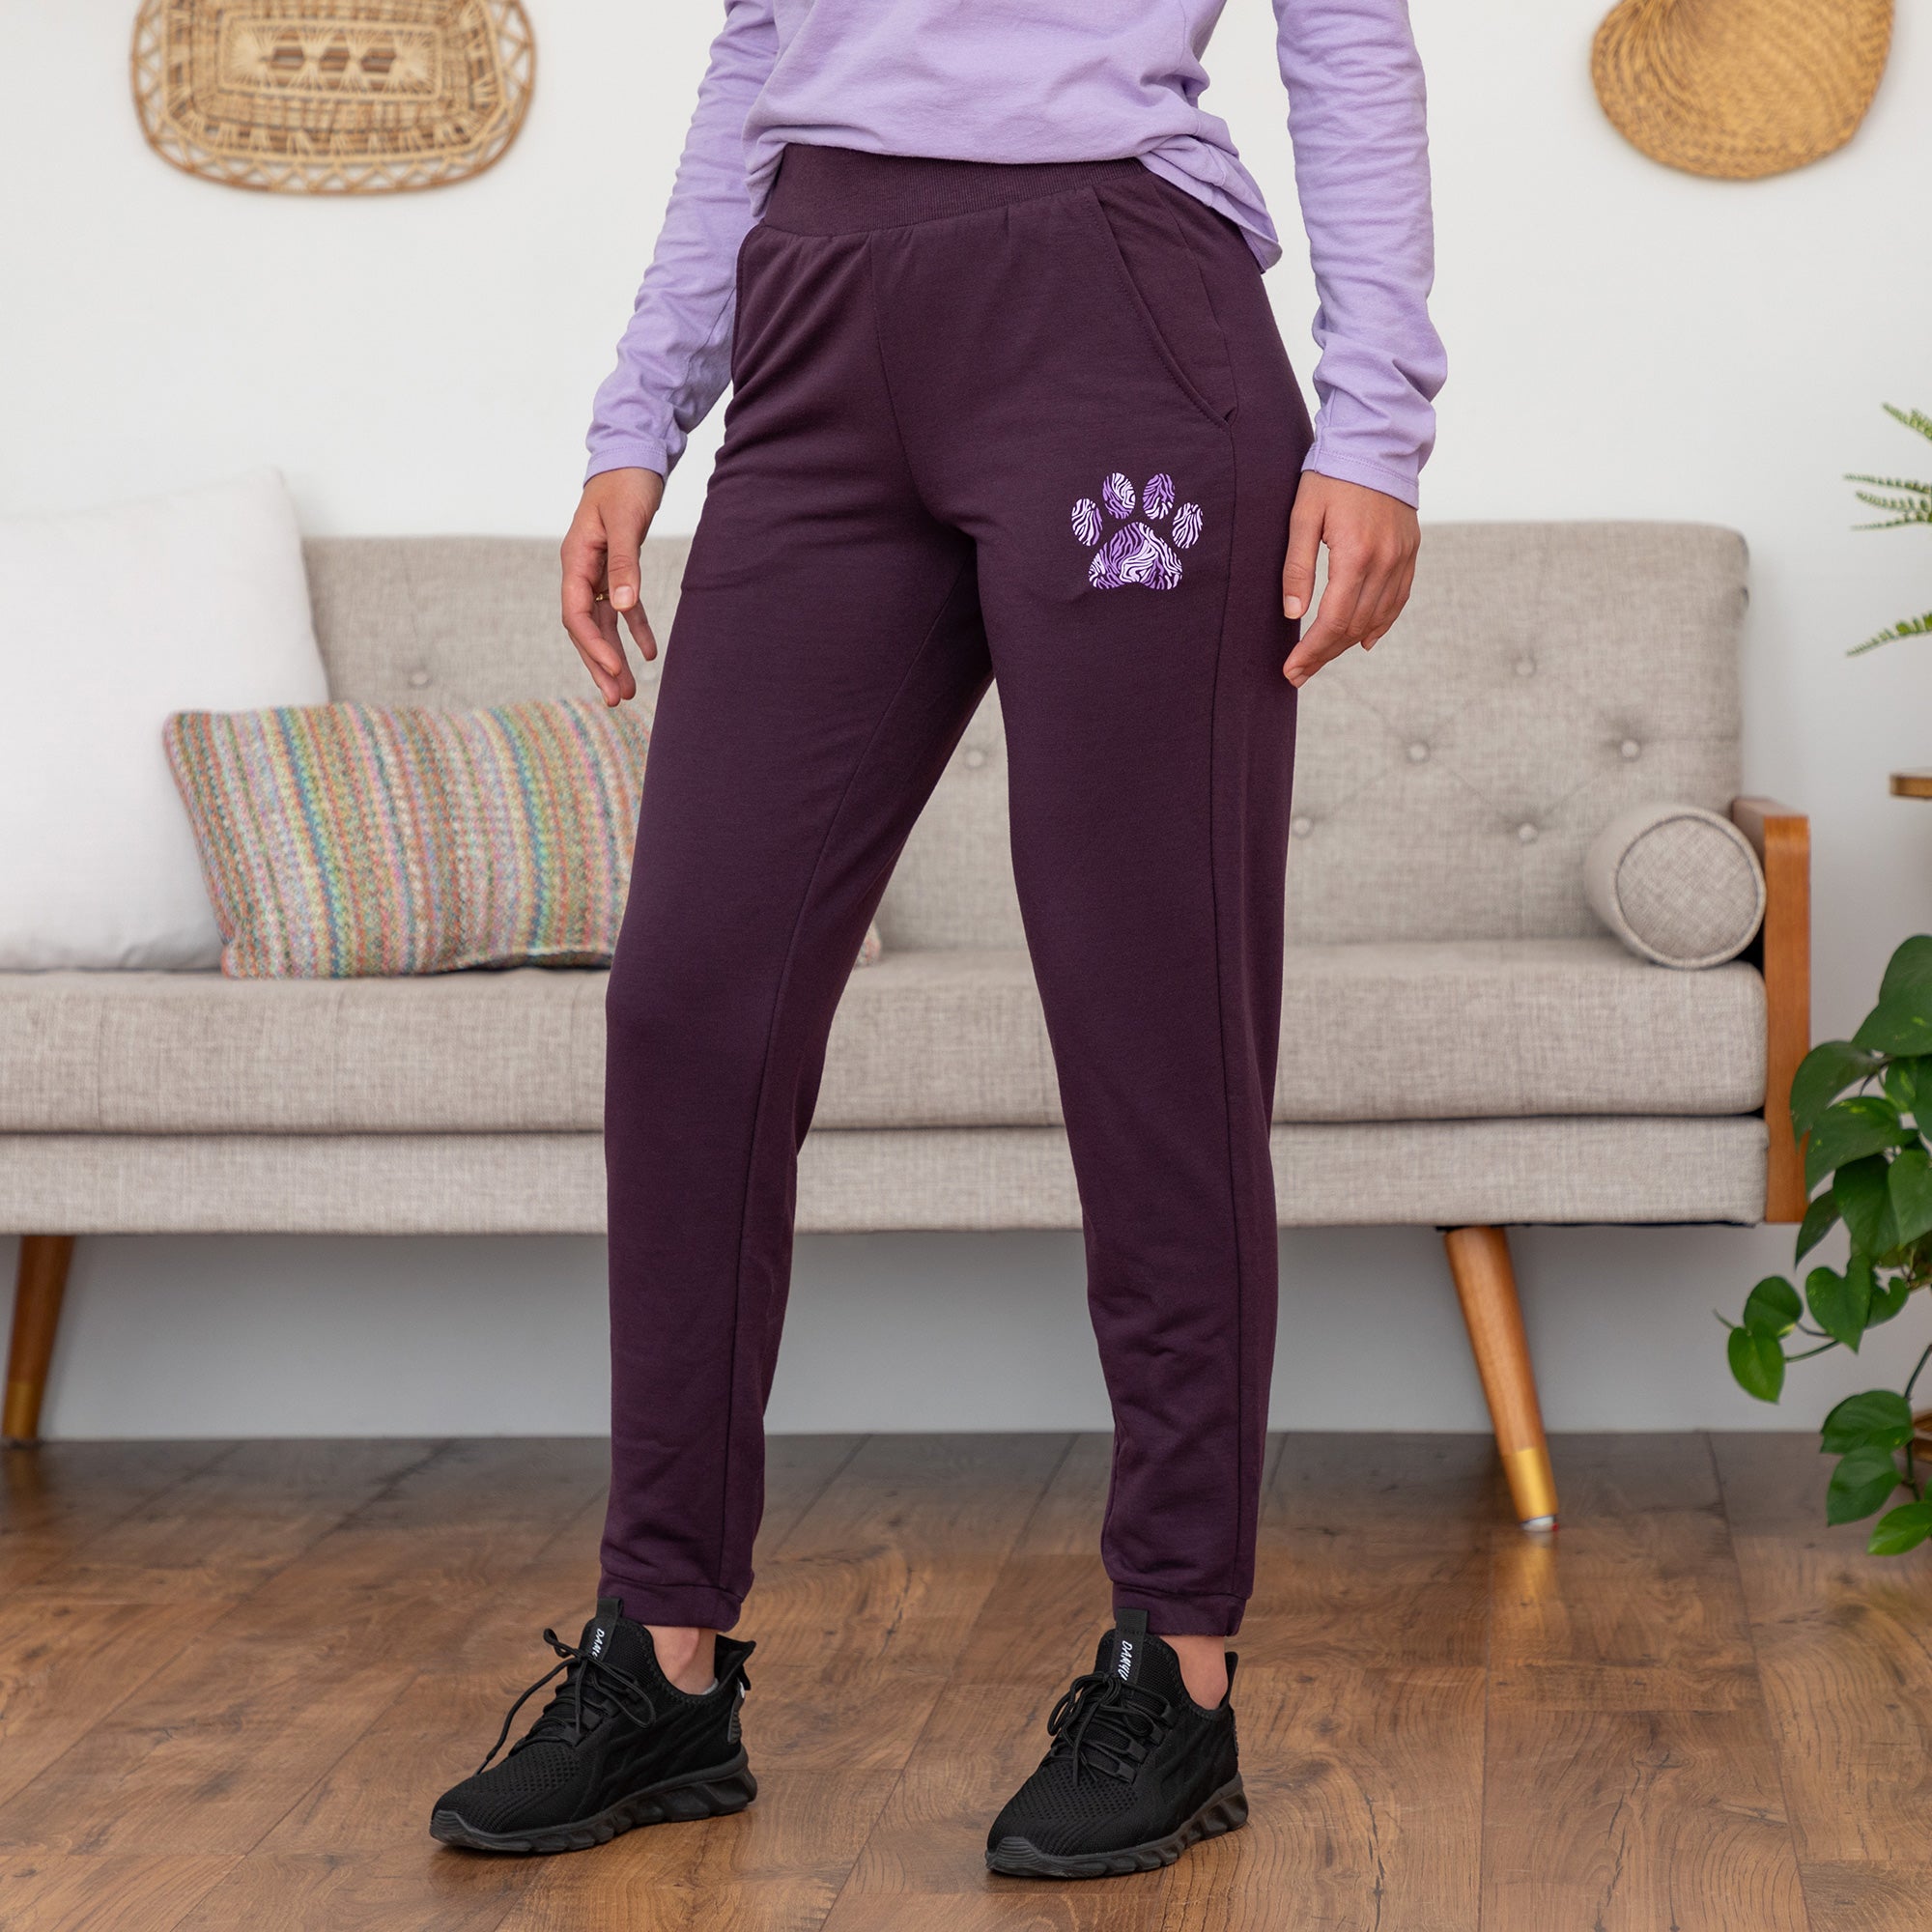 Paw Print Lightweight Tapered Sweatpants With Pockets & Elastic Waist - 3X